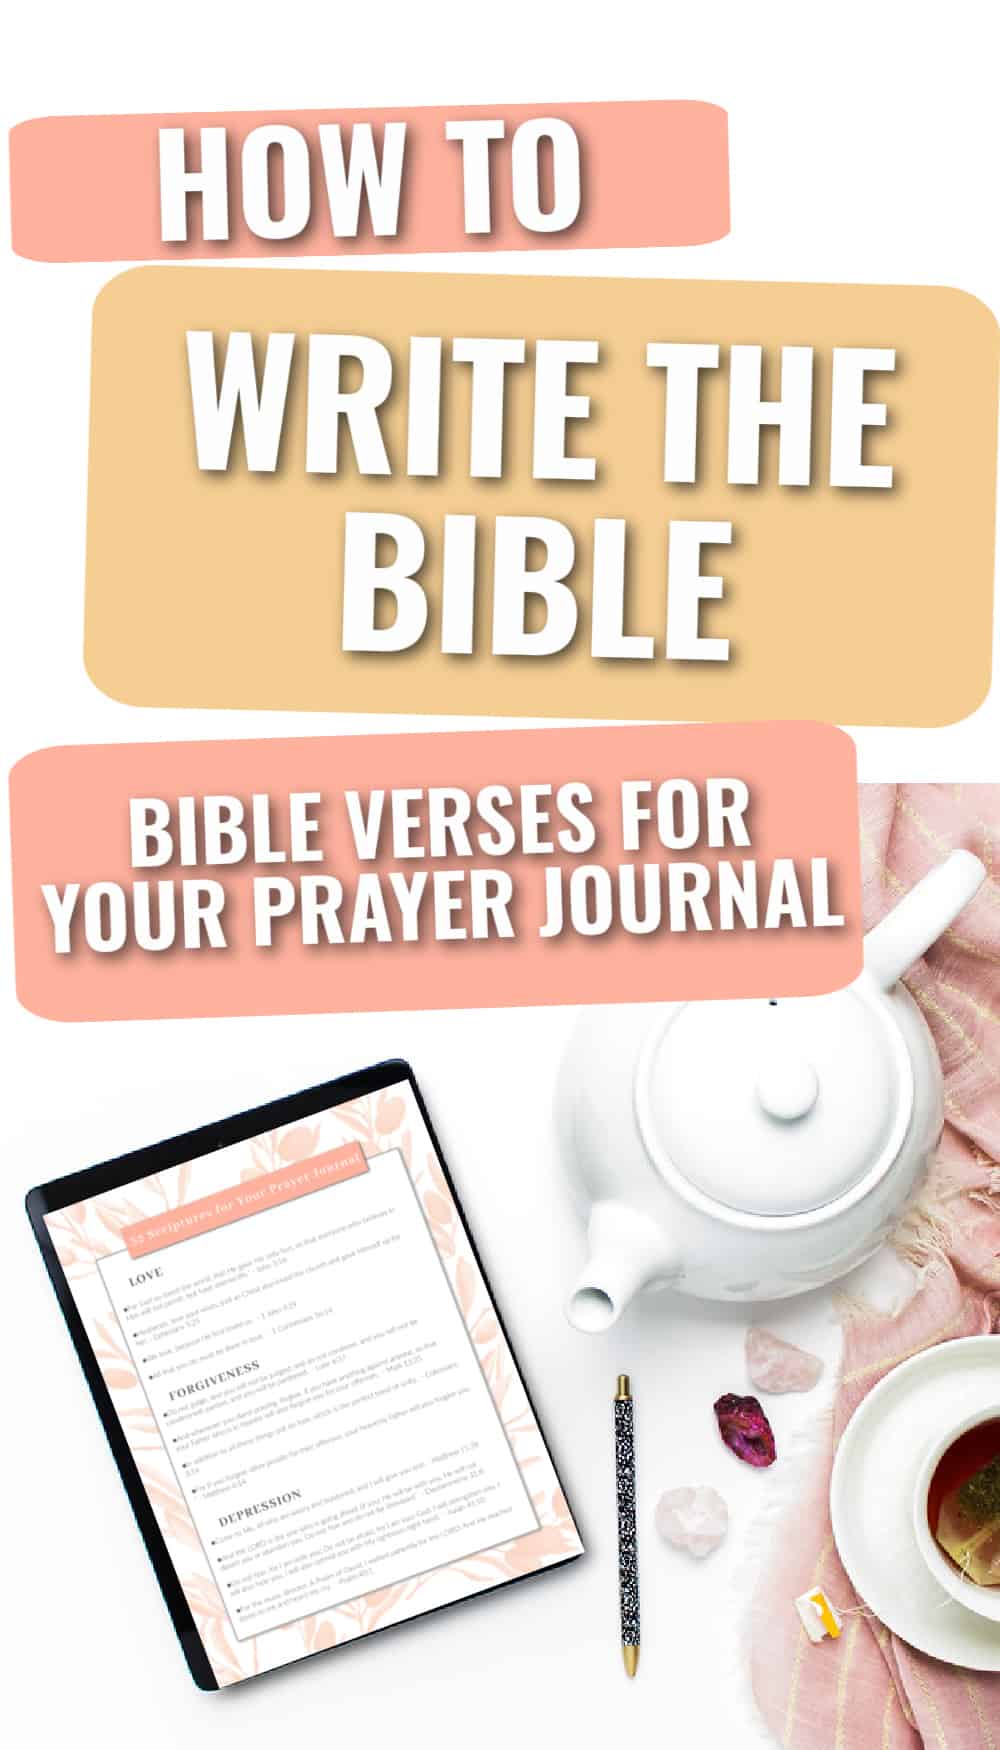 Title: Writing the Bible: Bible Verses for Your Prayer Journal Picture: teapot, blanket, and ipad